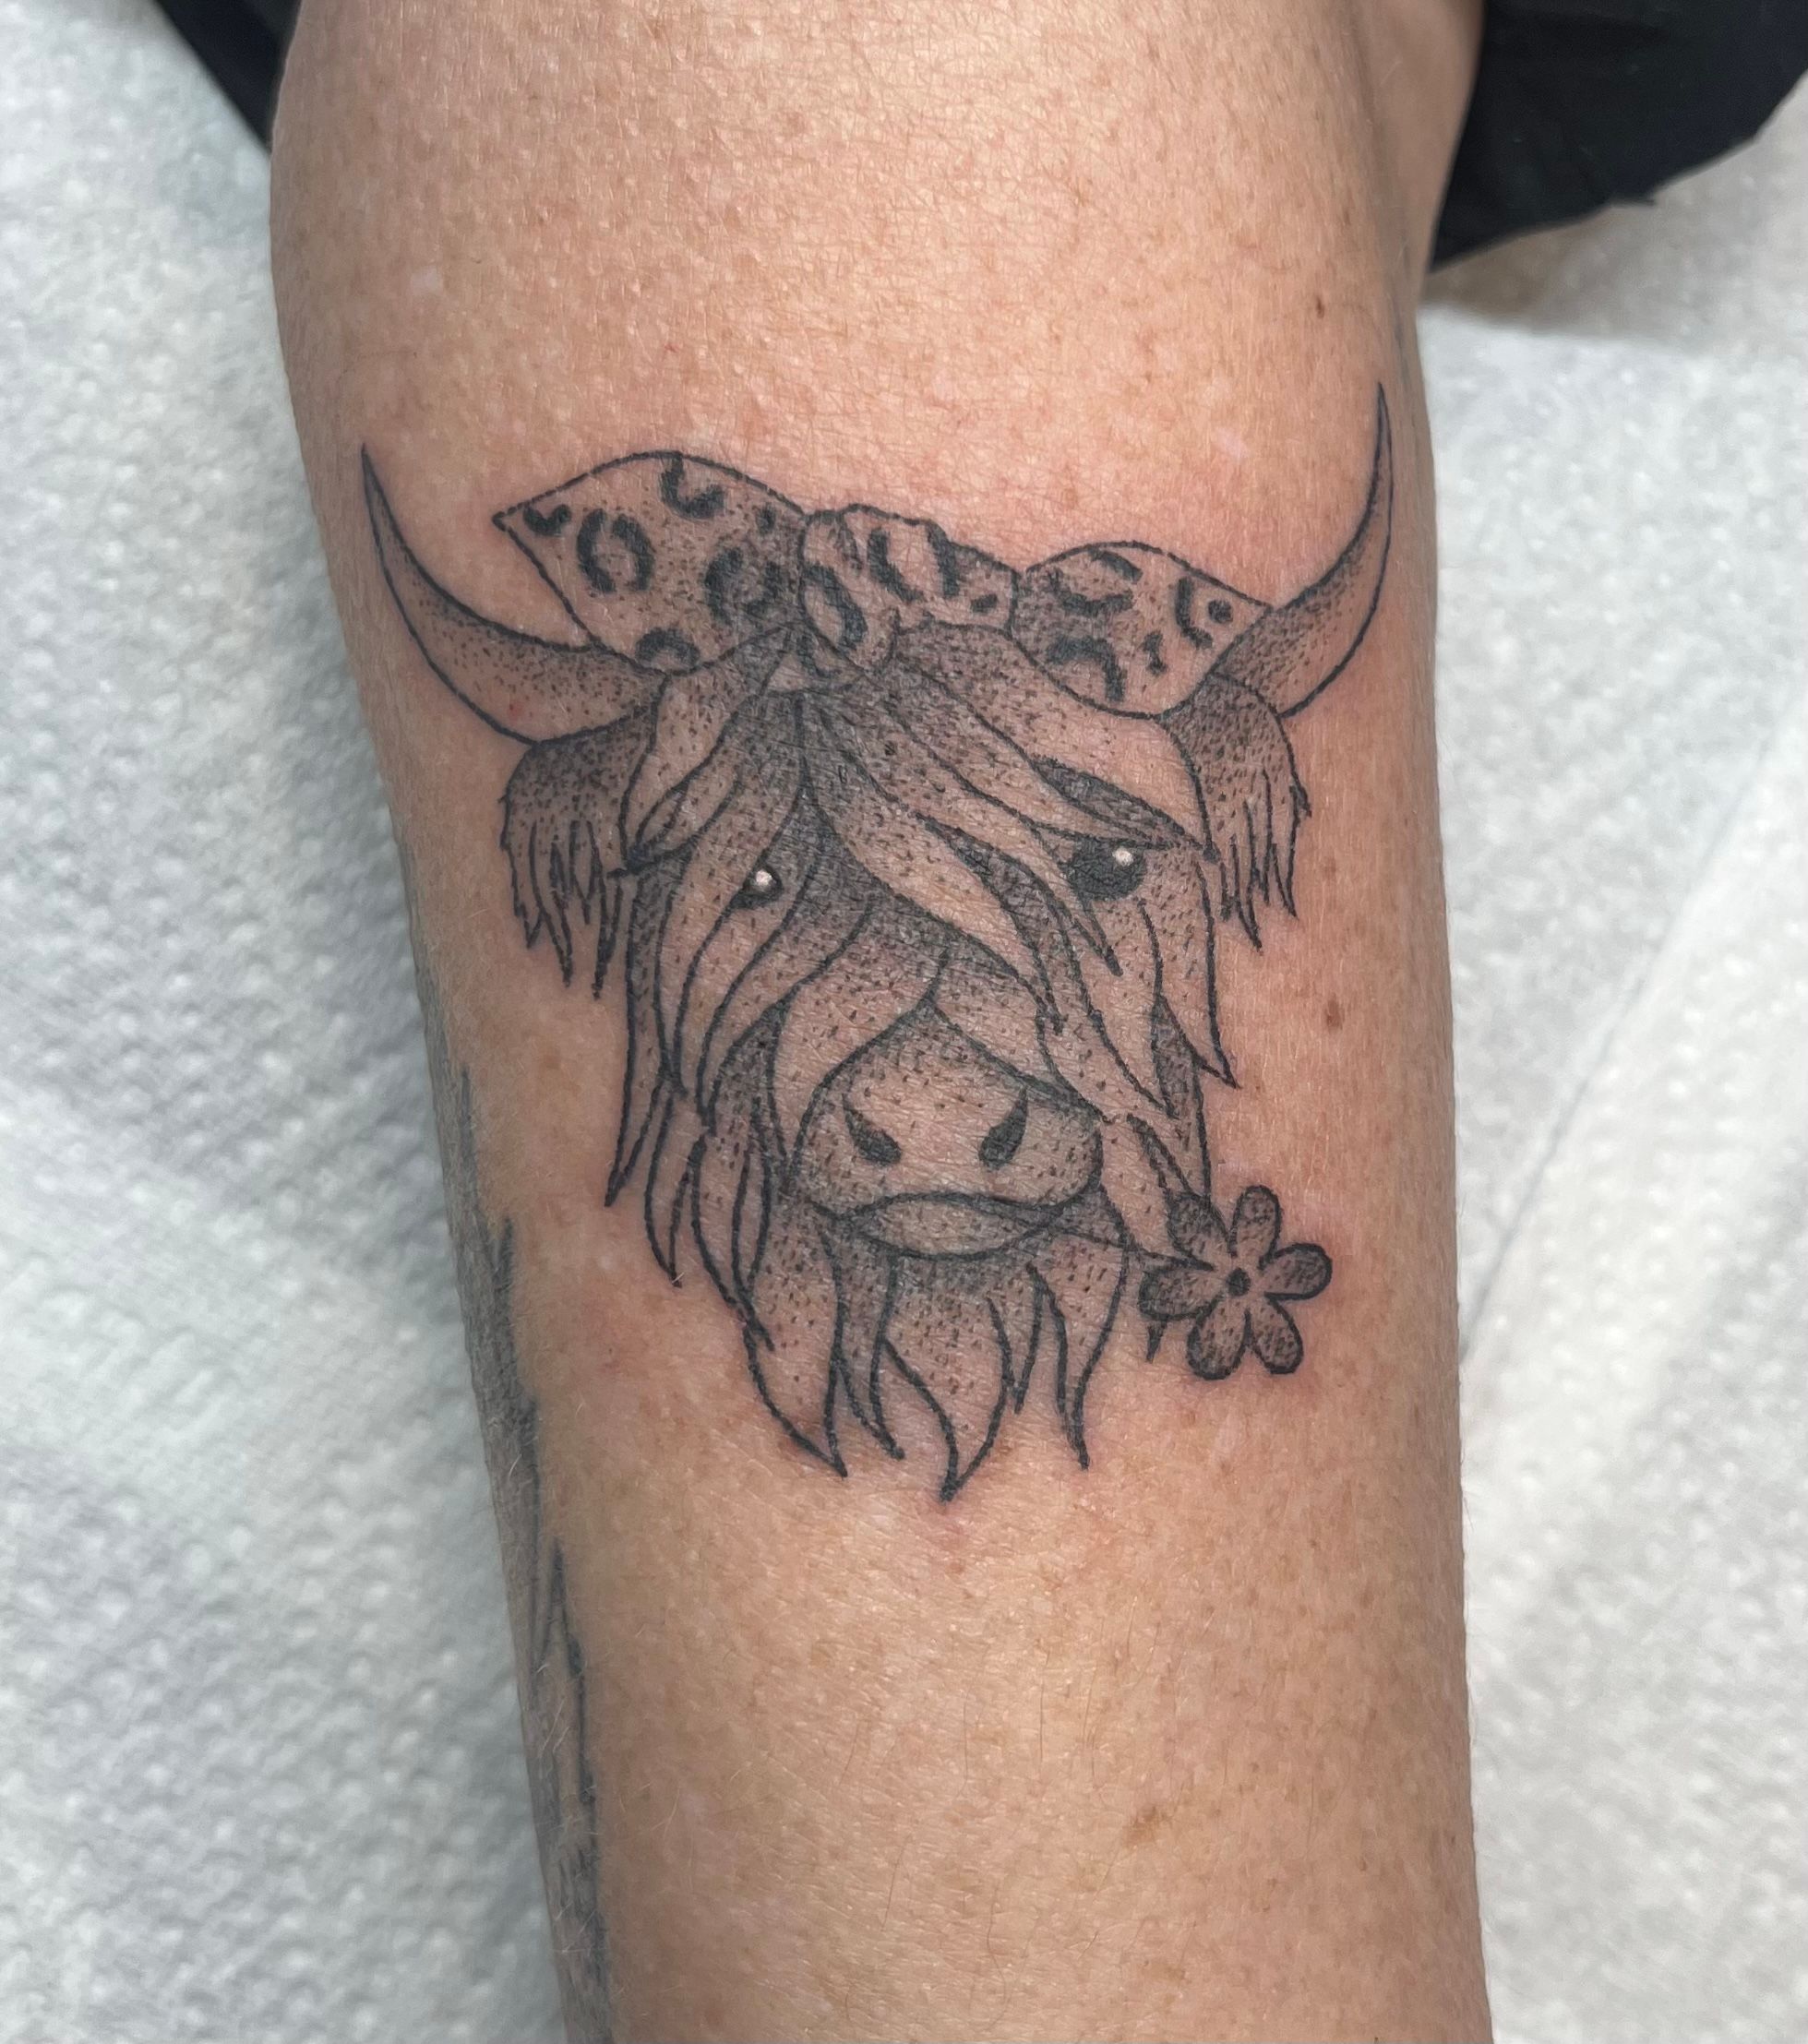 Bricktop tattoo - Highland Cow Cover up done today by Aimee :-)  #coveruptattoo #shouldertattoo #highlandcow | Facebook